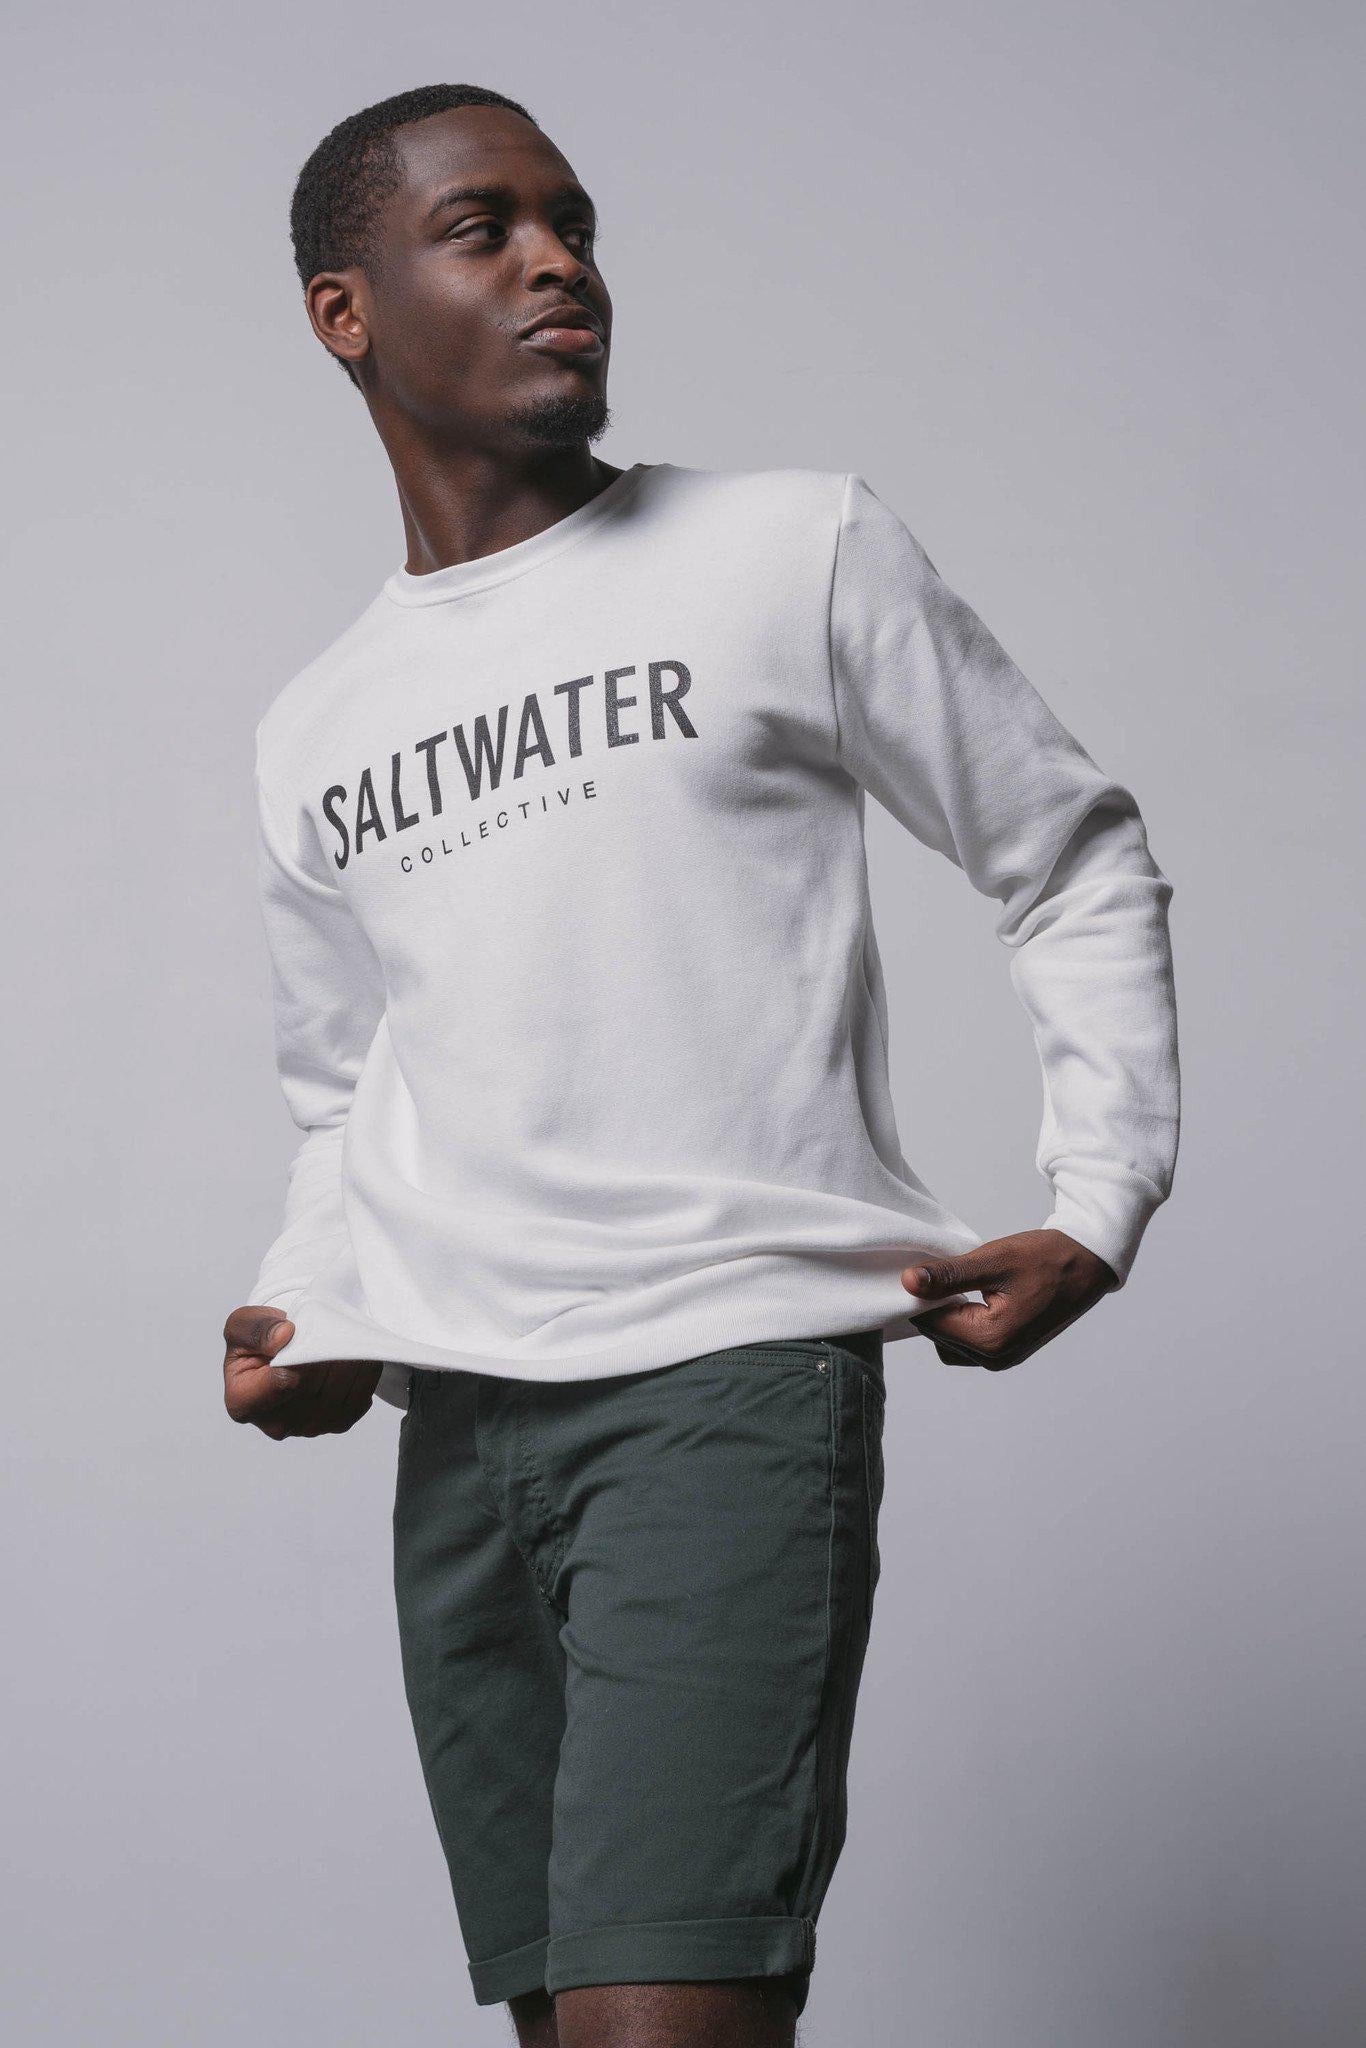 A guy standing in front of a white wall looking to the side and pulling a white crewneck sweatshirt down with a black SALTWATER logo printed across the chest.